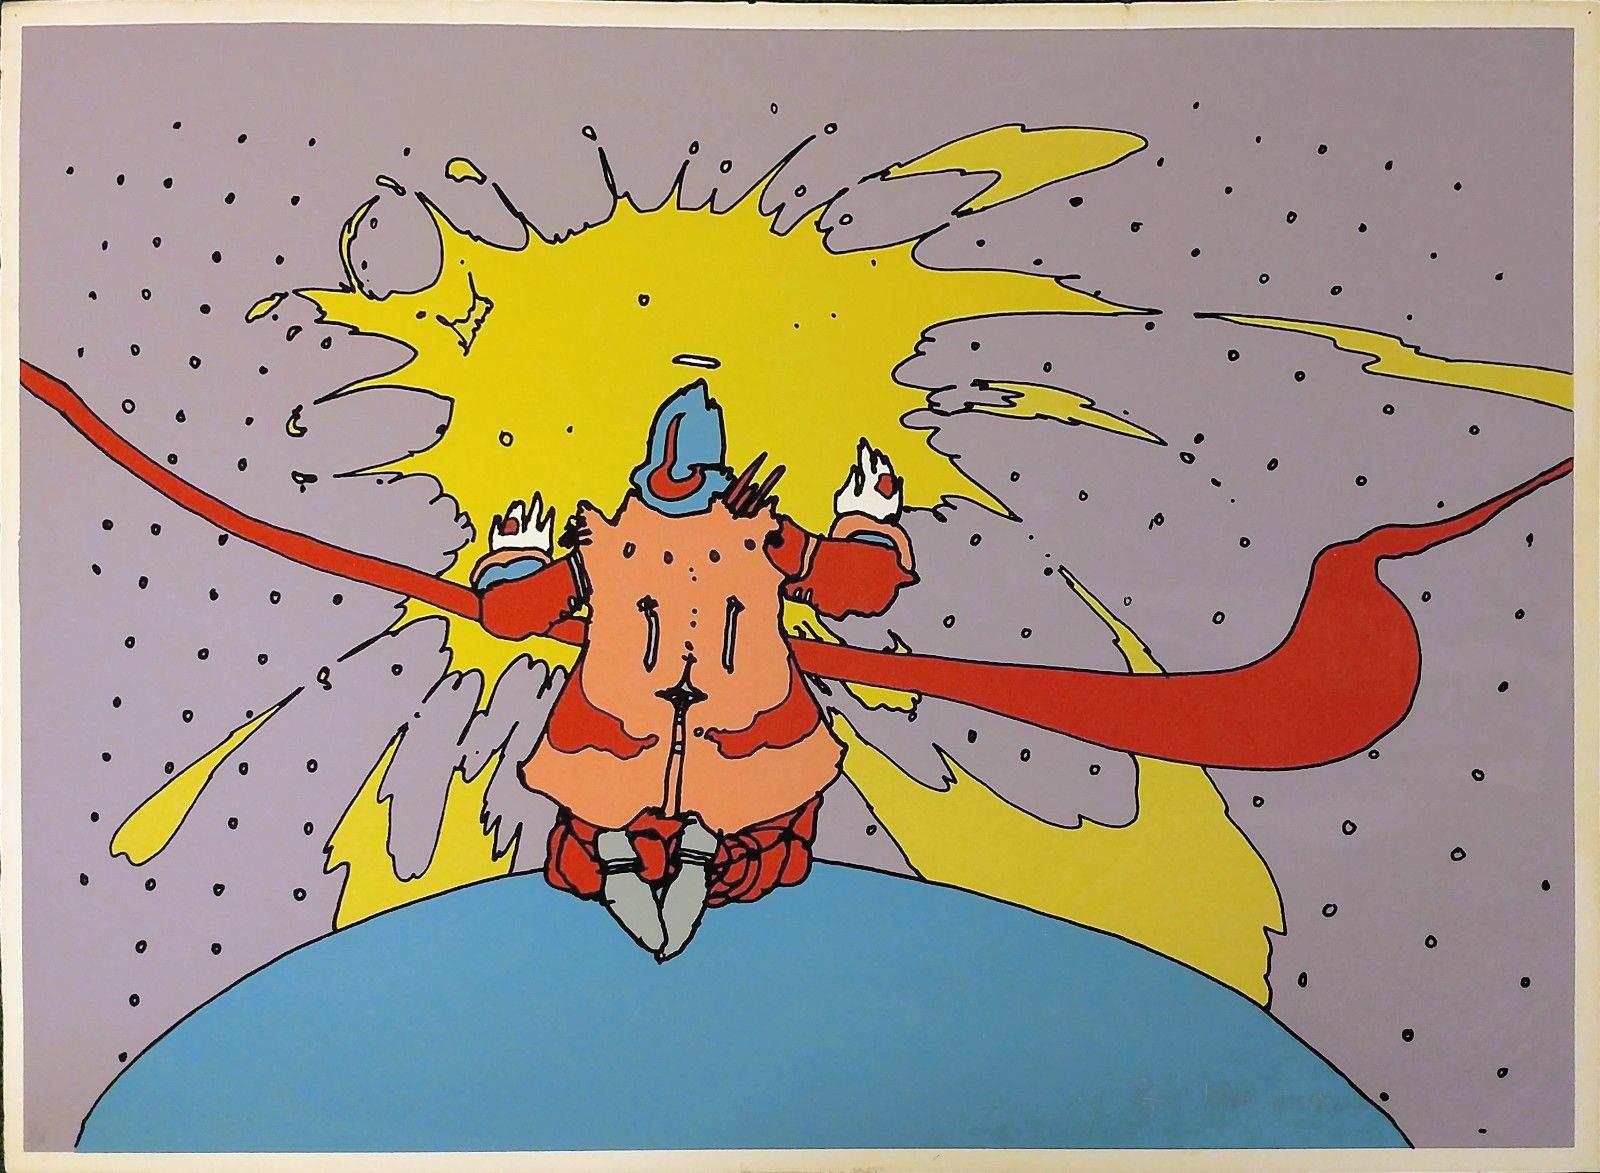 Peter Max Portrait Print - ENTERING A NEW STATE